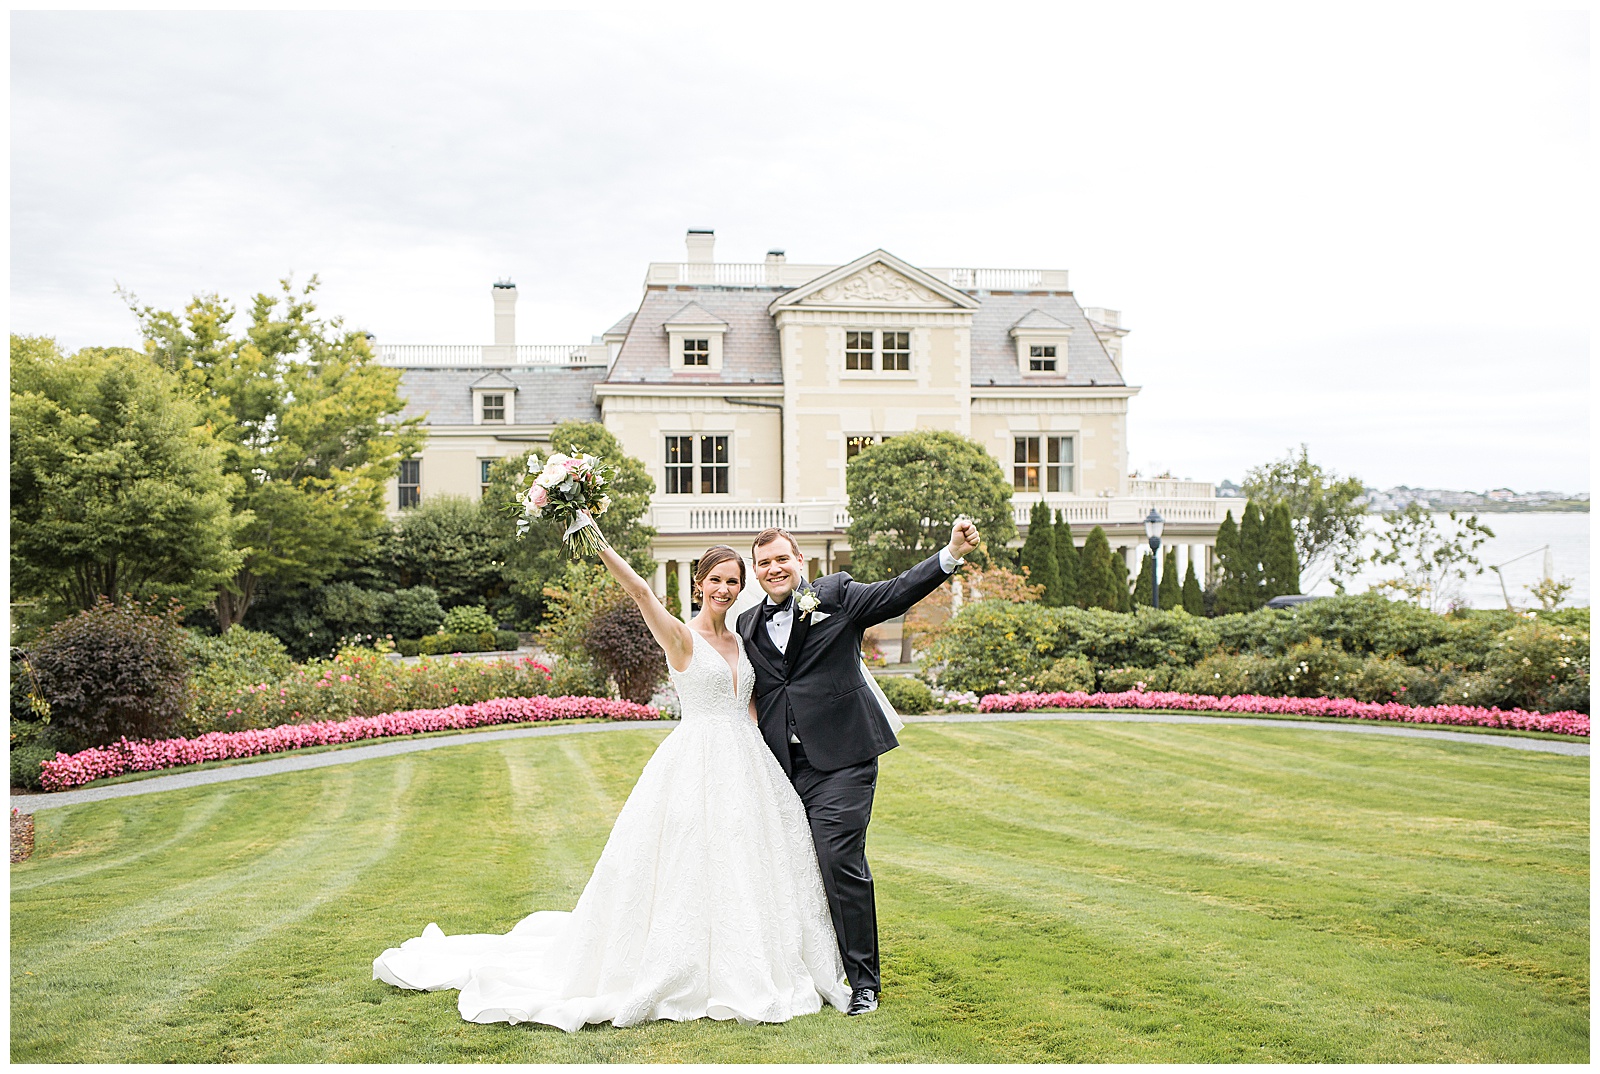 Couple wedding portraits at the Chanler at Cliff Walk